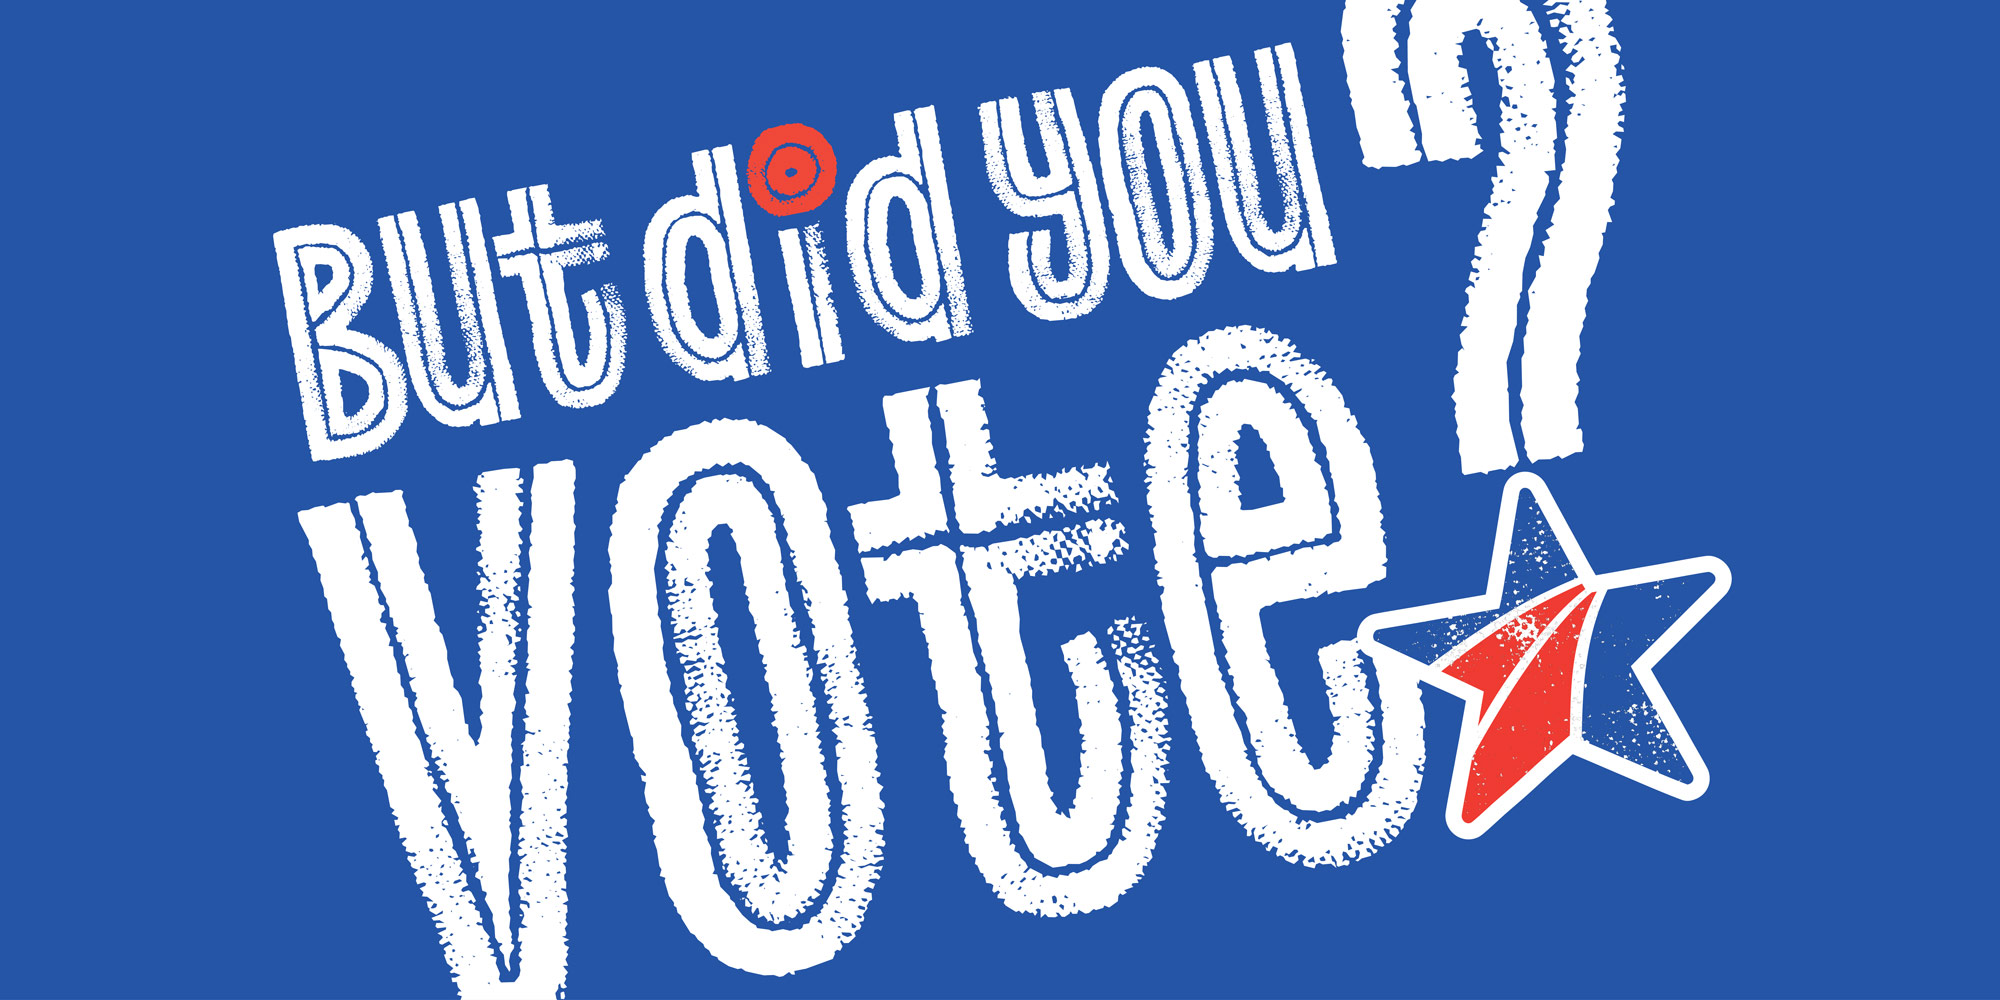 but did you vote? - Blue Star Families campaign for military families